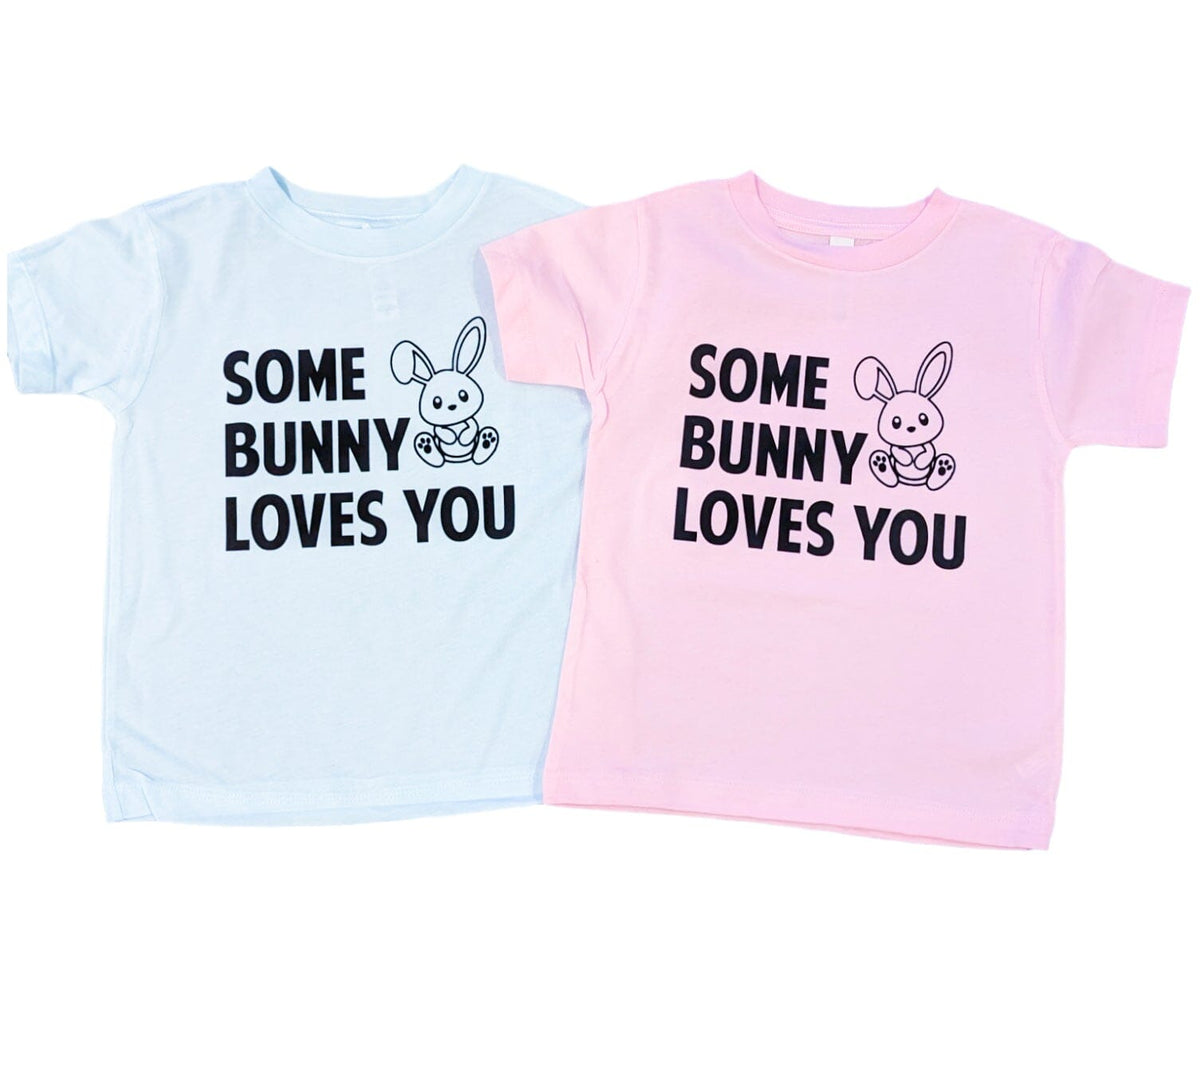 Some Bunny Loves You Tees